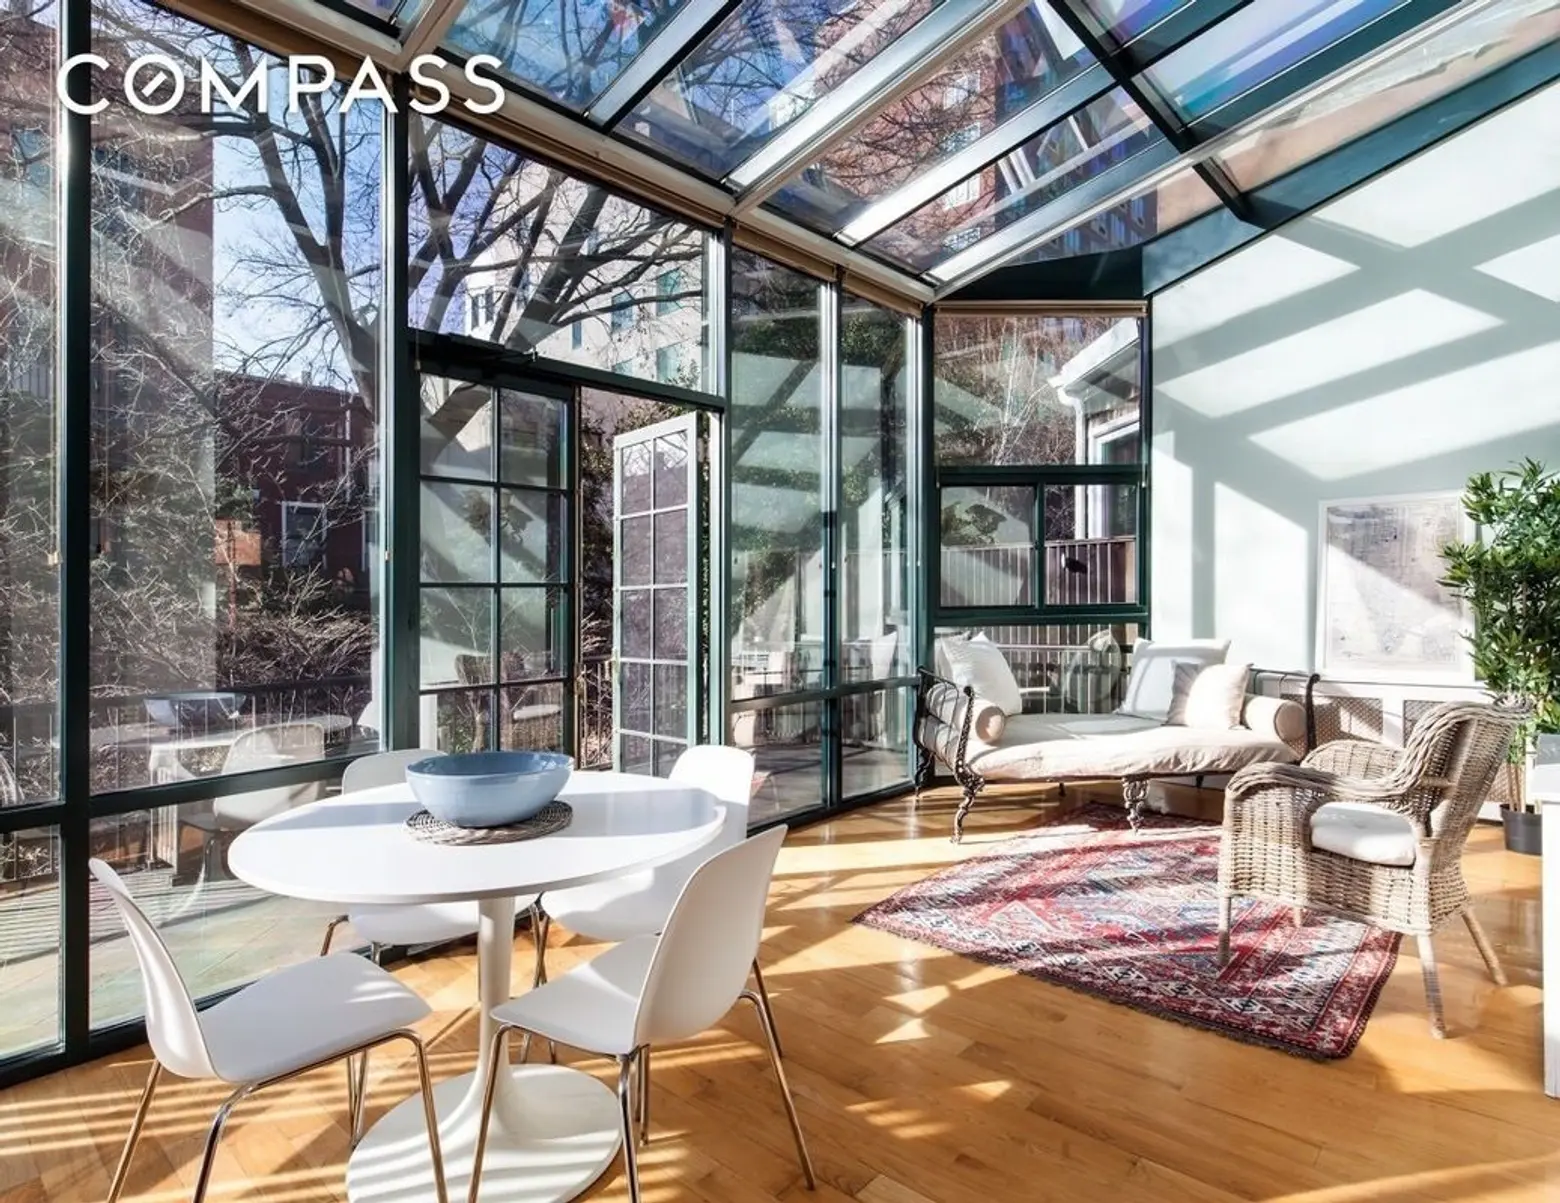 $12,000/month to rent this triplex townhouse beauty in Boerum Hill